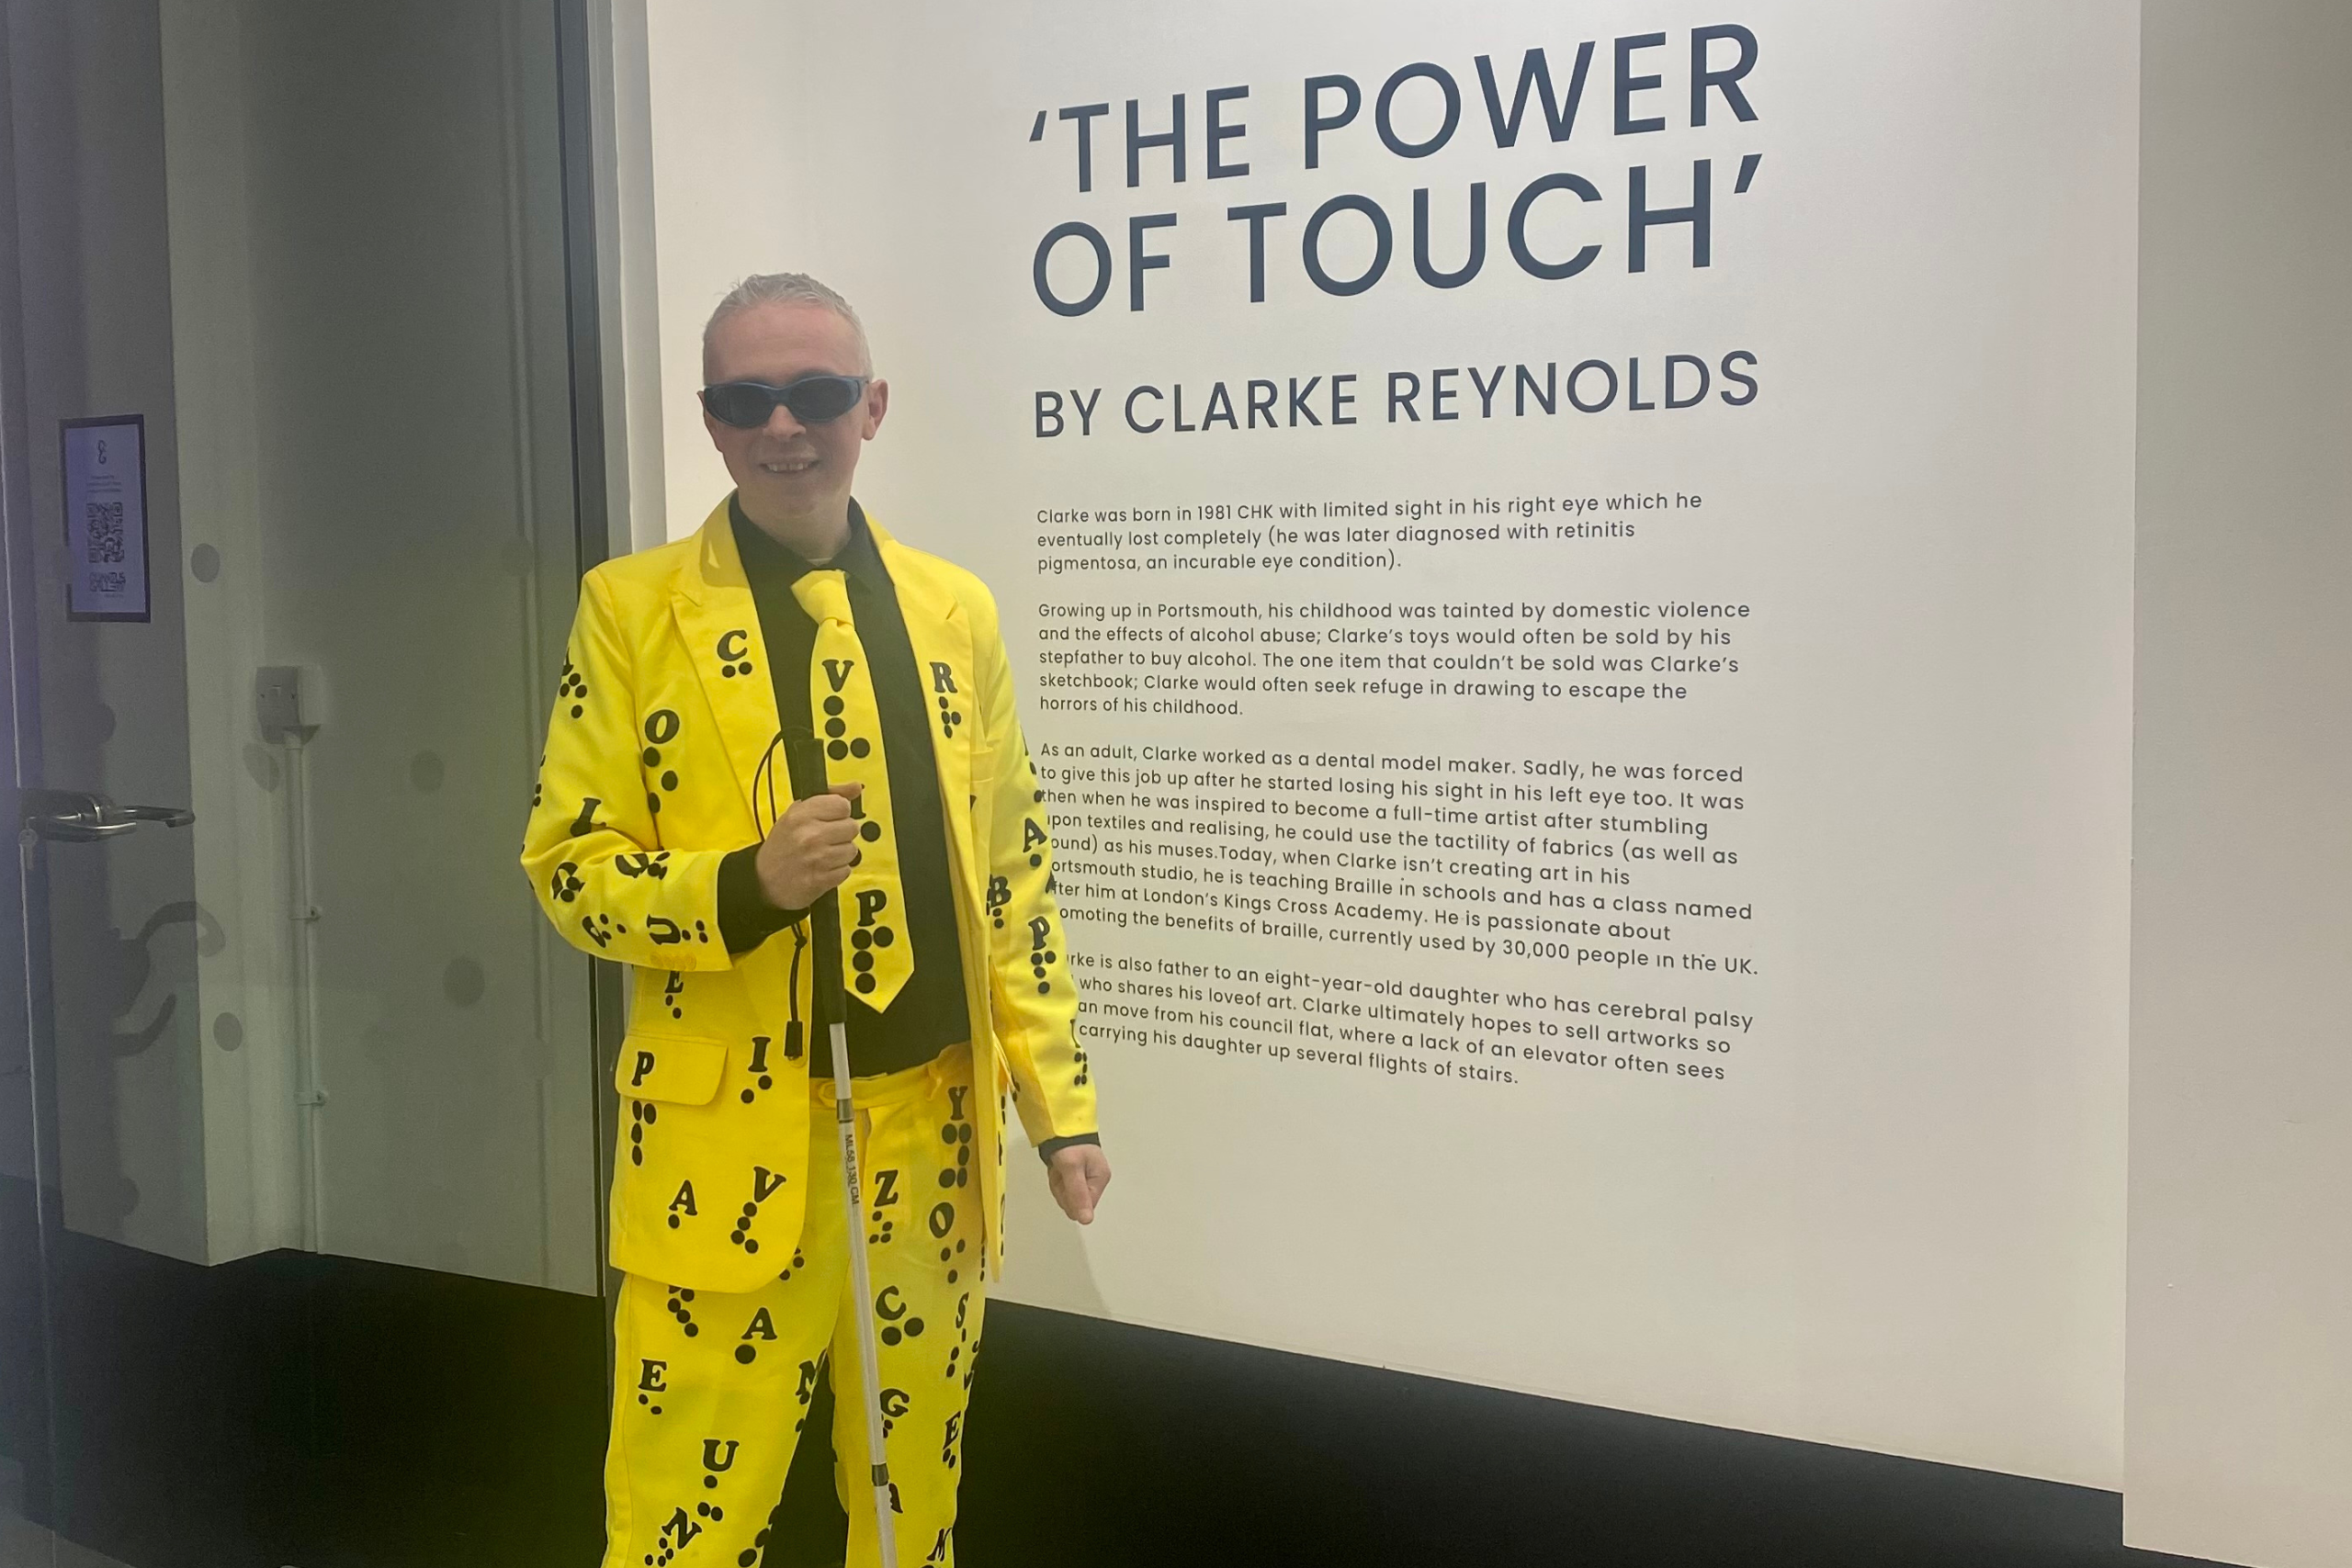 Clarke Reynolds wearing a yellow suit covered in Braille letters.